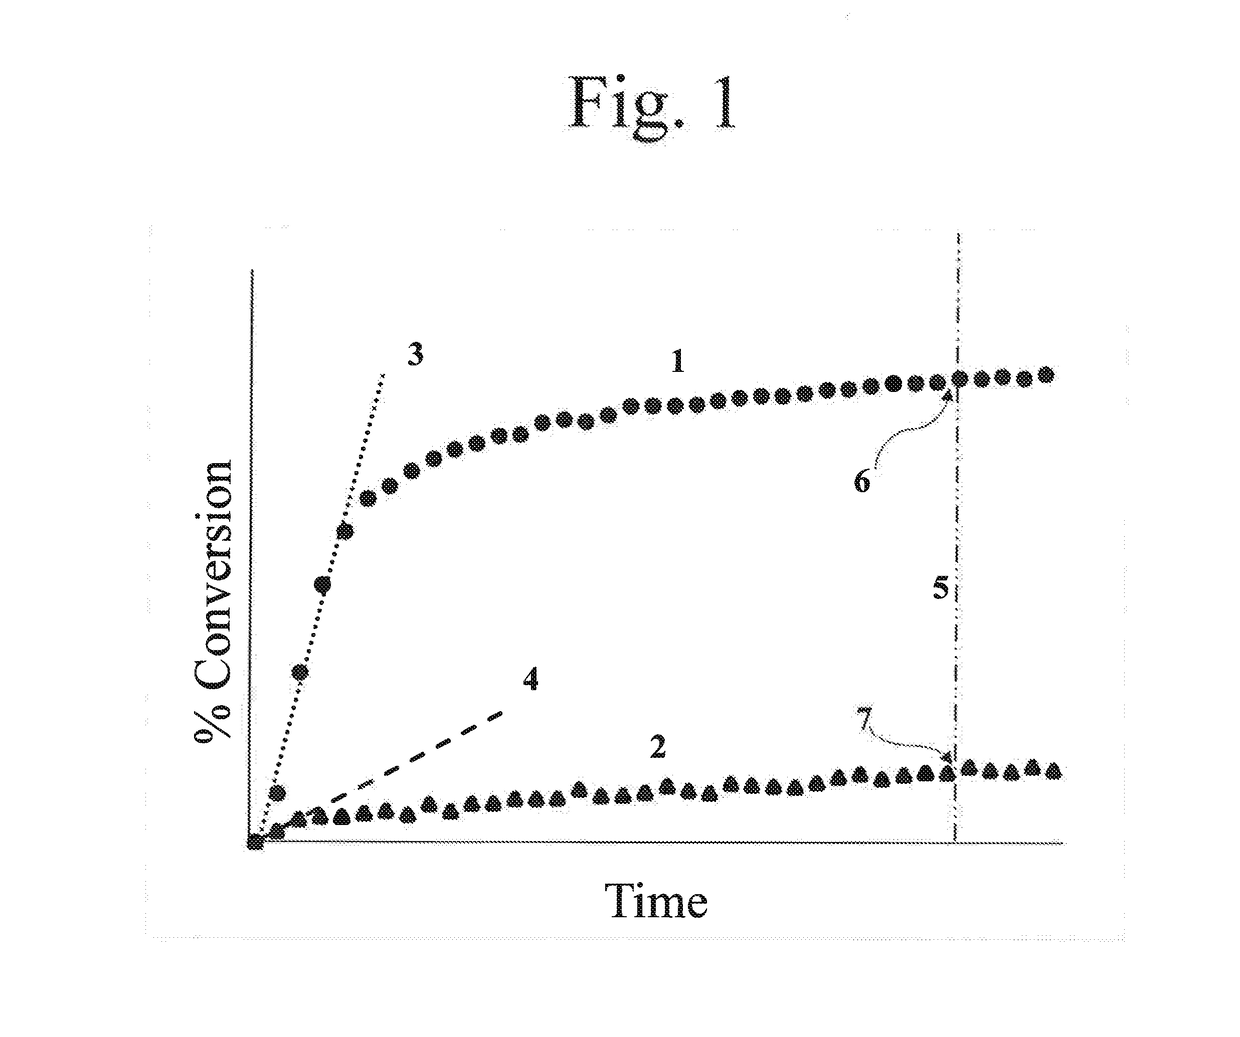 Liquid, hybrid uv/vis radiation curable resin compositions for additive fabrication